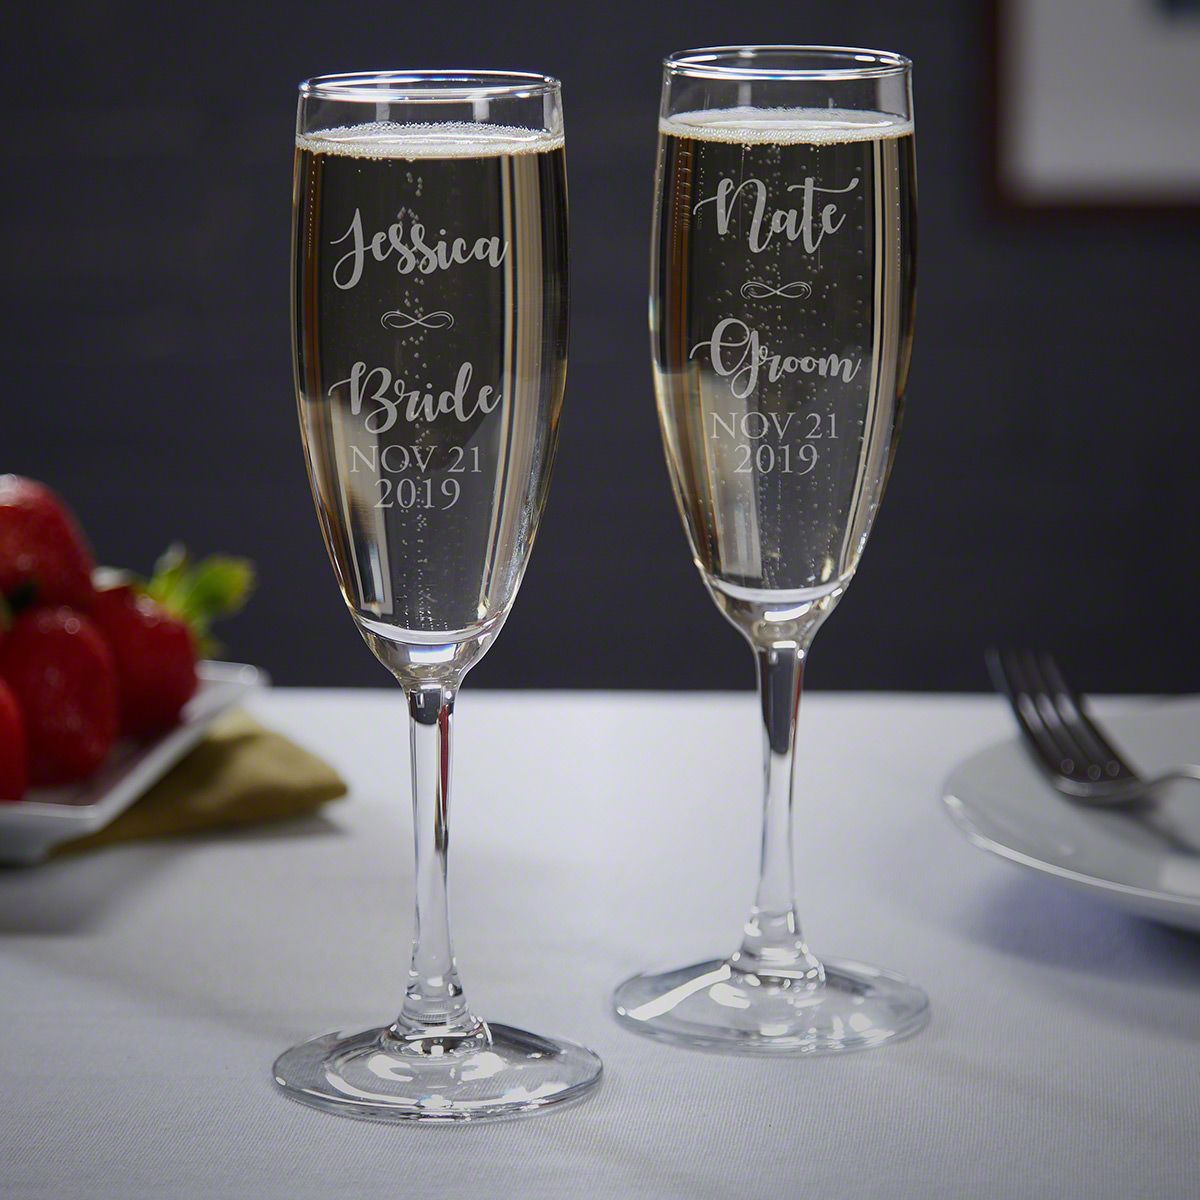 wedding decorations personalized wedding glasses Toasting flutes Personalized gift flutes set of2 champagne flutes bride and groom